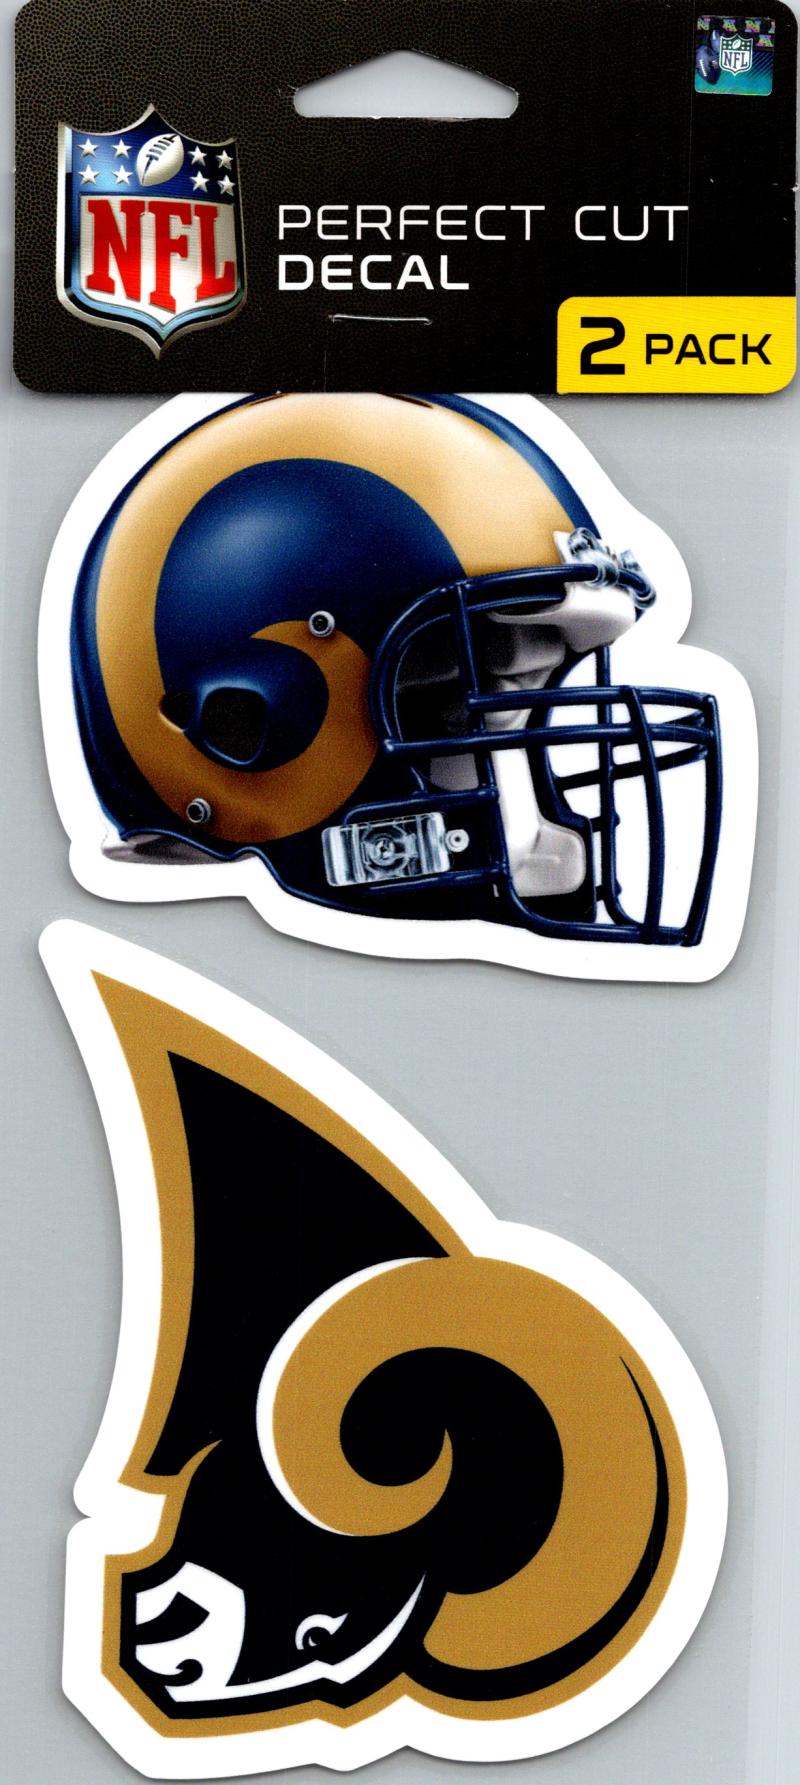 Los Angeles Rams Perfect Cut 4"x4" Decal Sticker Pack of 2 Image 1